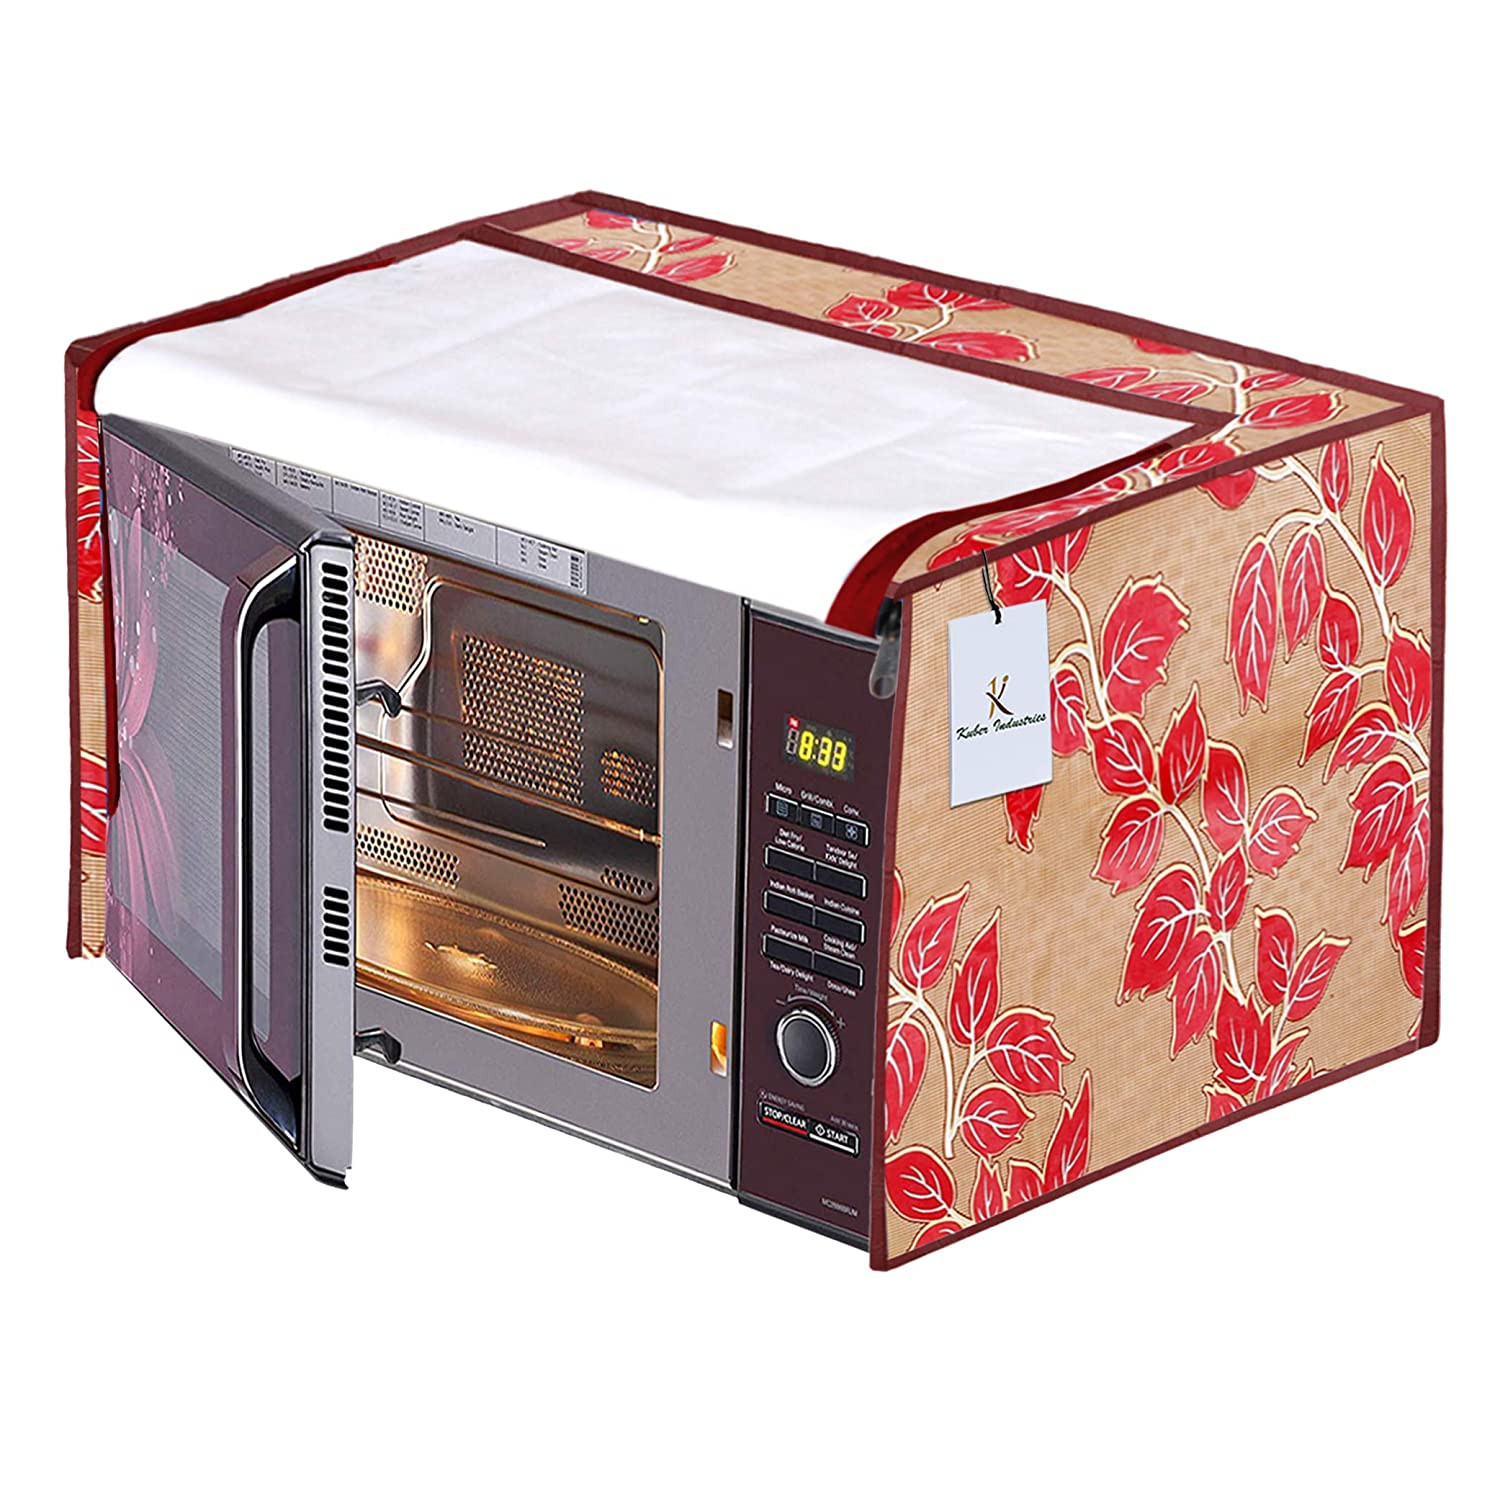 Kuber Industries PVC Leaf Printed Microwave Oven Cover,20 Ltr. (Red)-HS43KUBMART25953